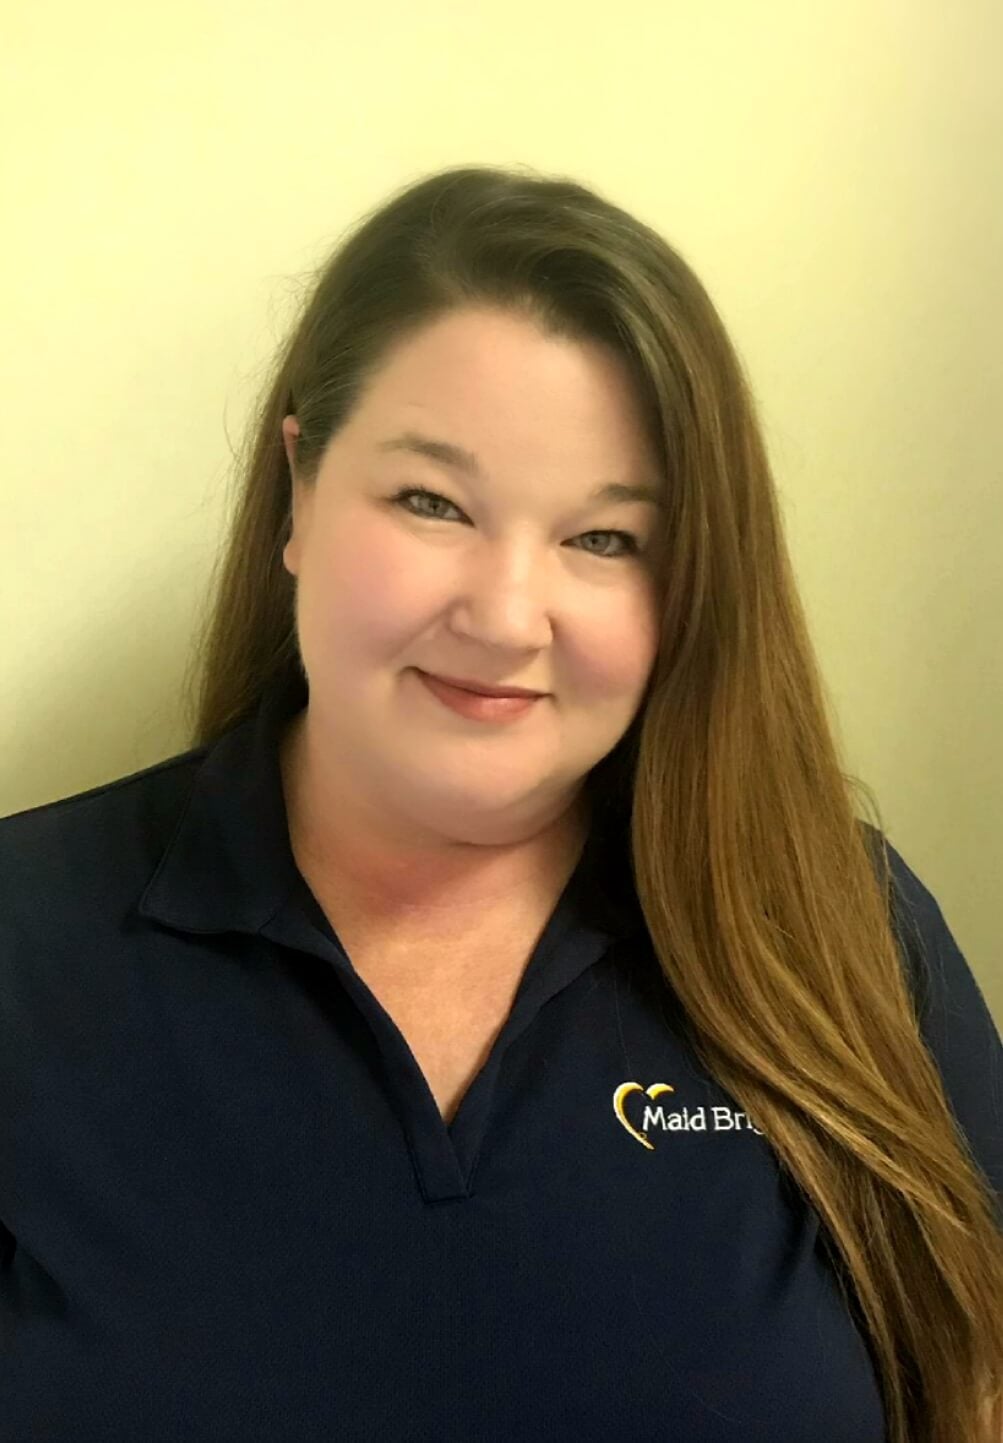 Laura - General Manager Maid Brigade NW Houston